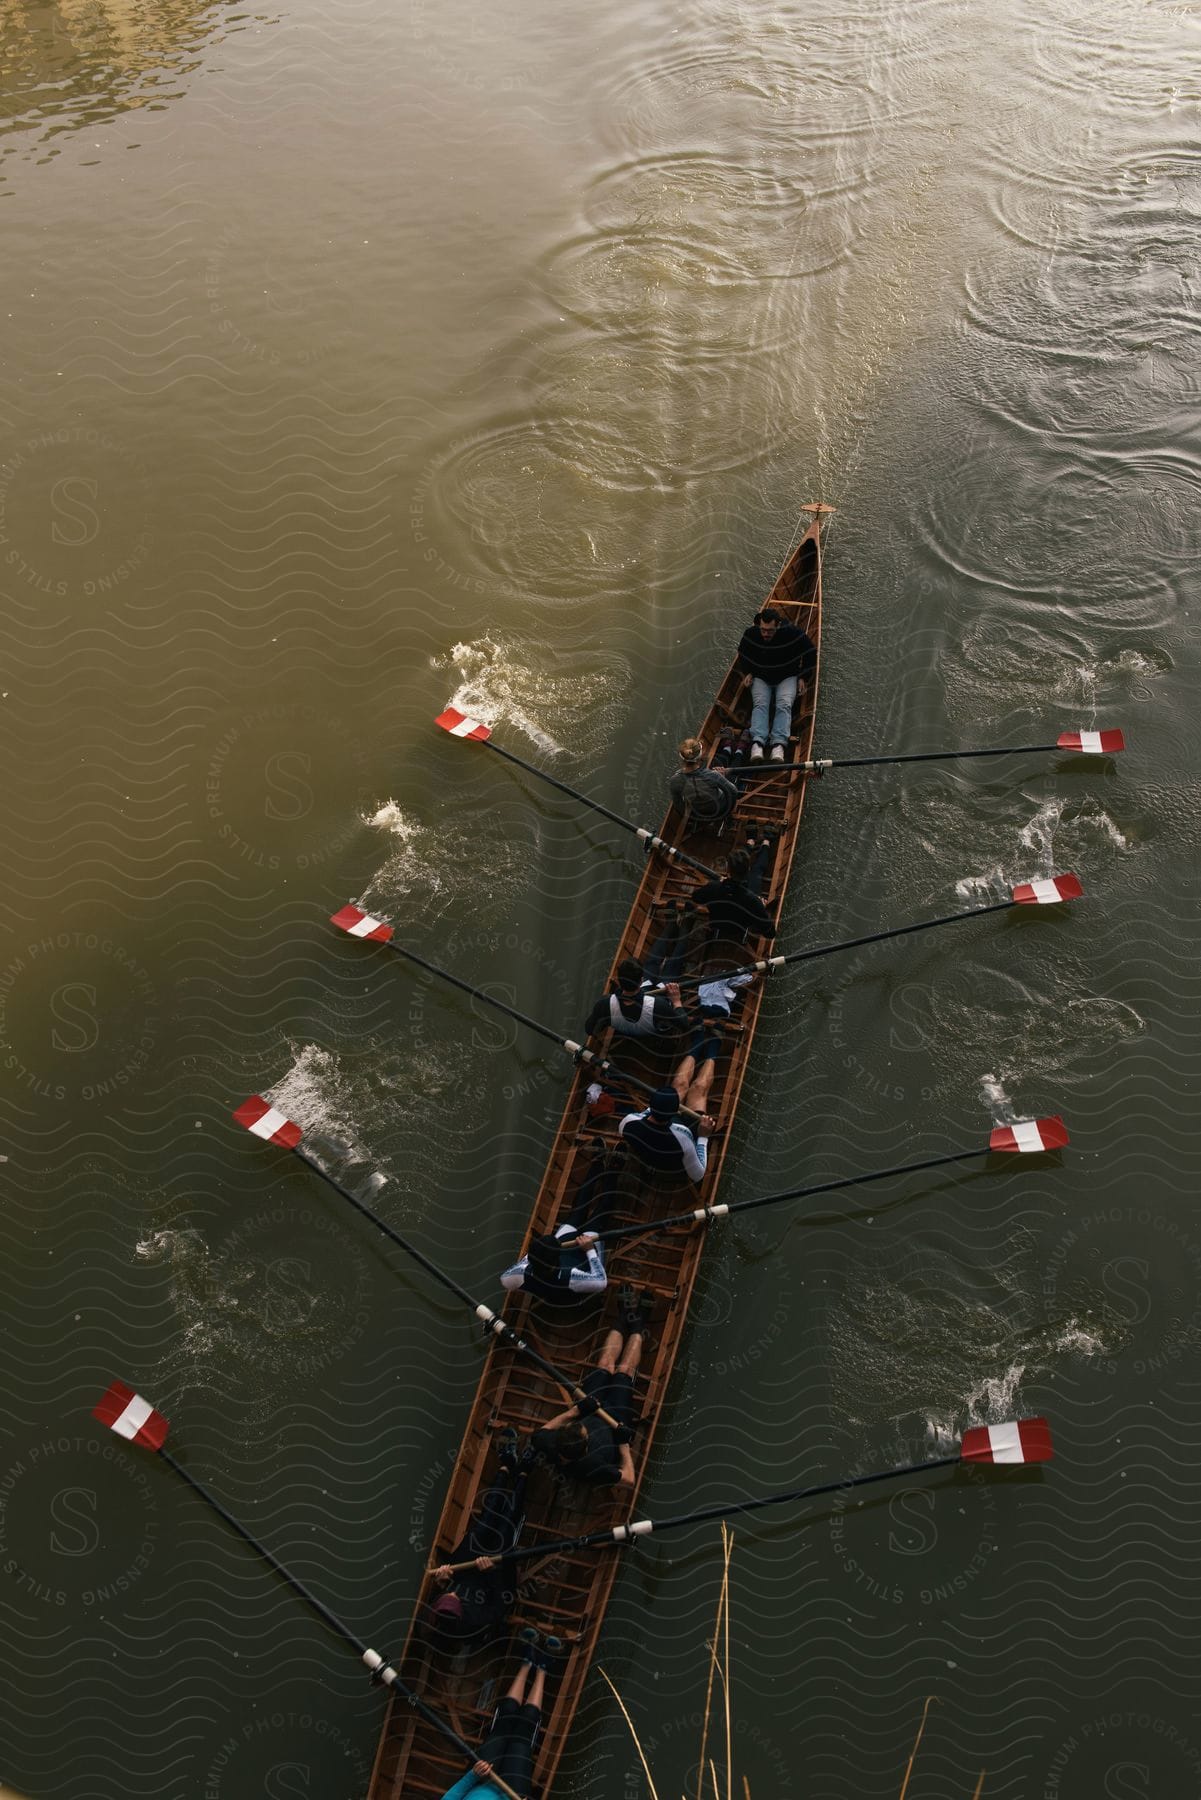 A rowing team is paddling on a lake